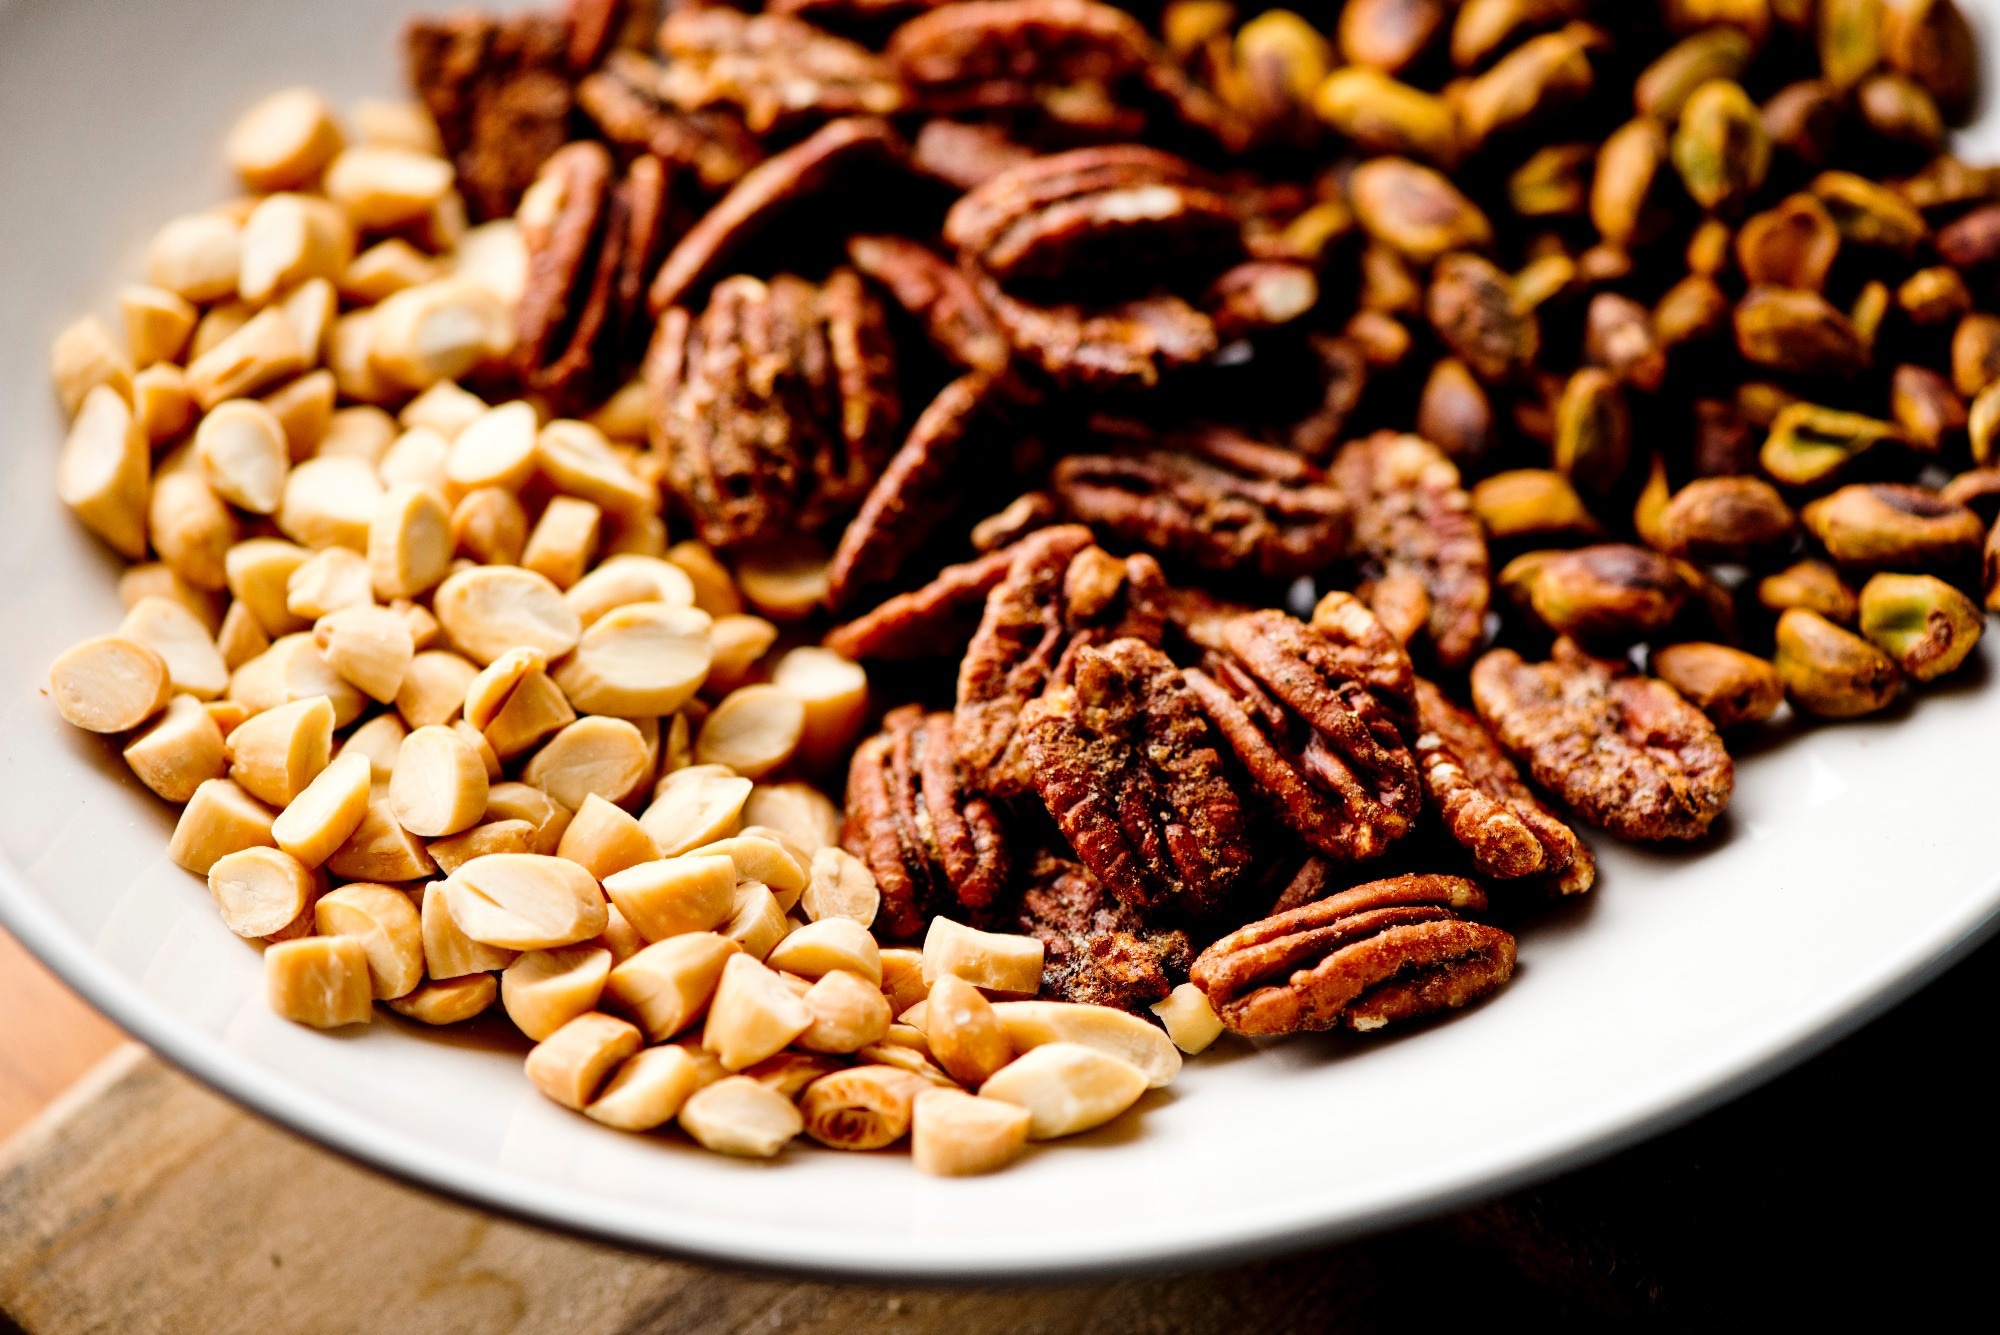 Review: Nut consumption and fertility: a systematic review and meta-analysis. Image Credit: Marie Sonmez Photography / Shutterstock